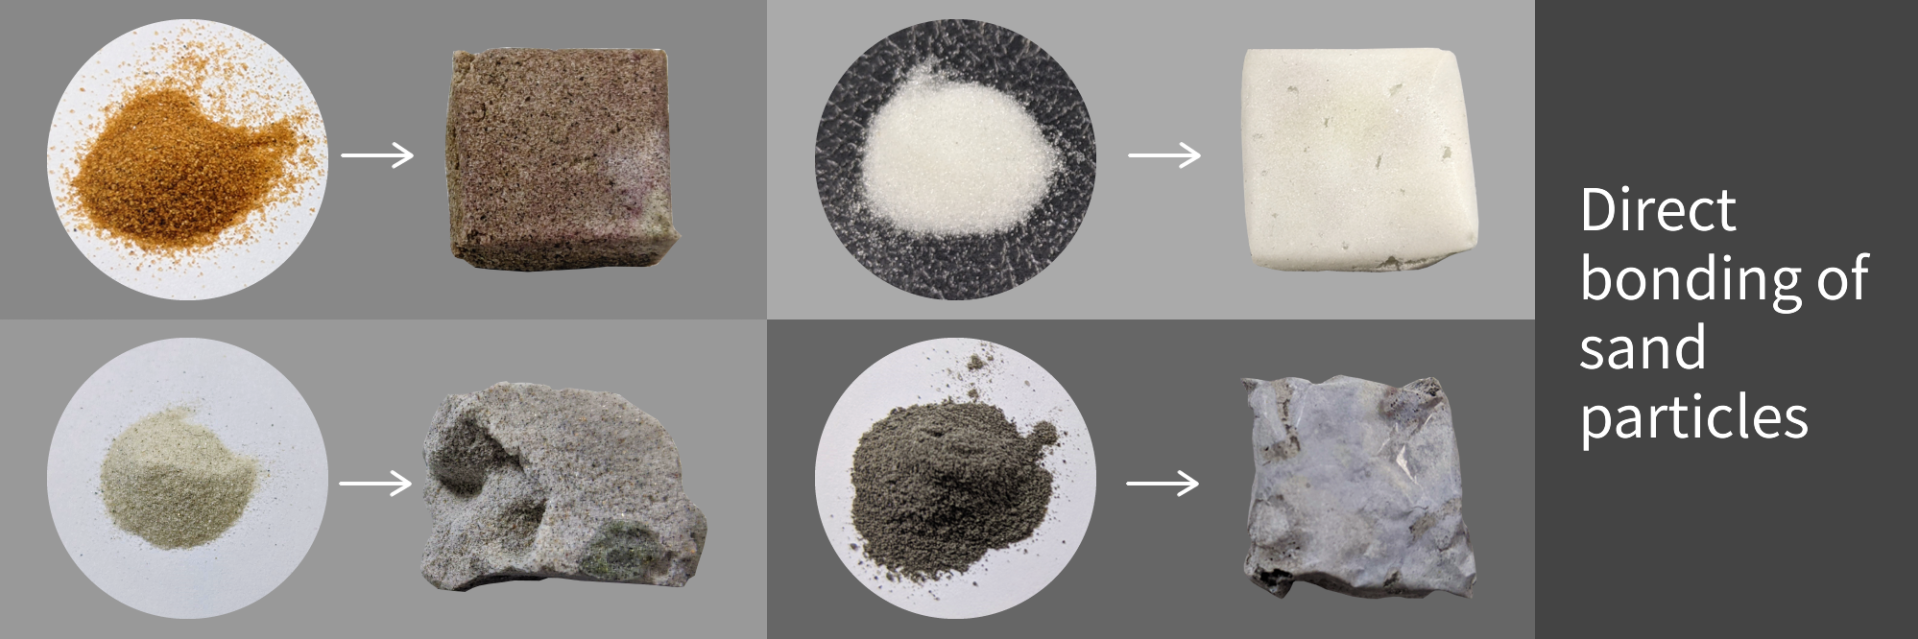 Direct bonding of sand particles